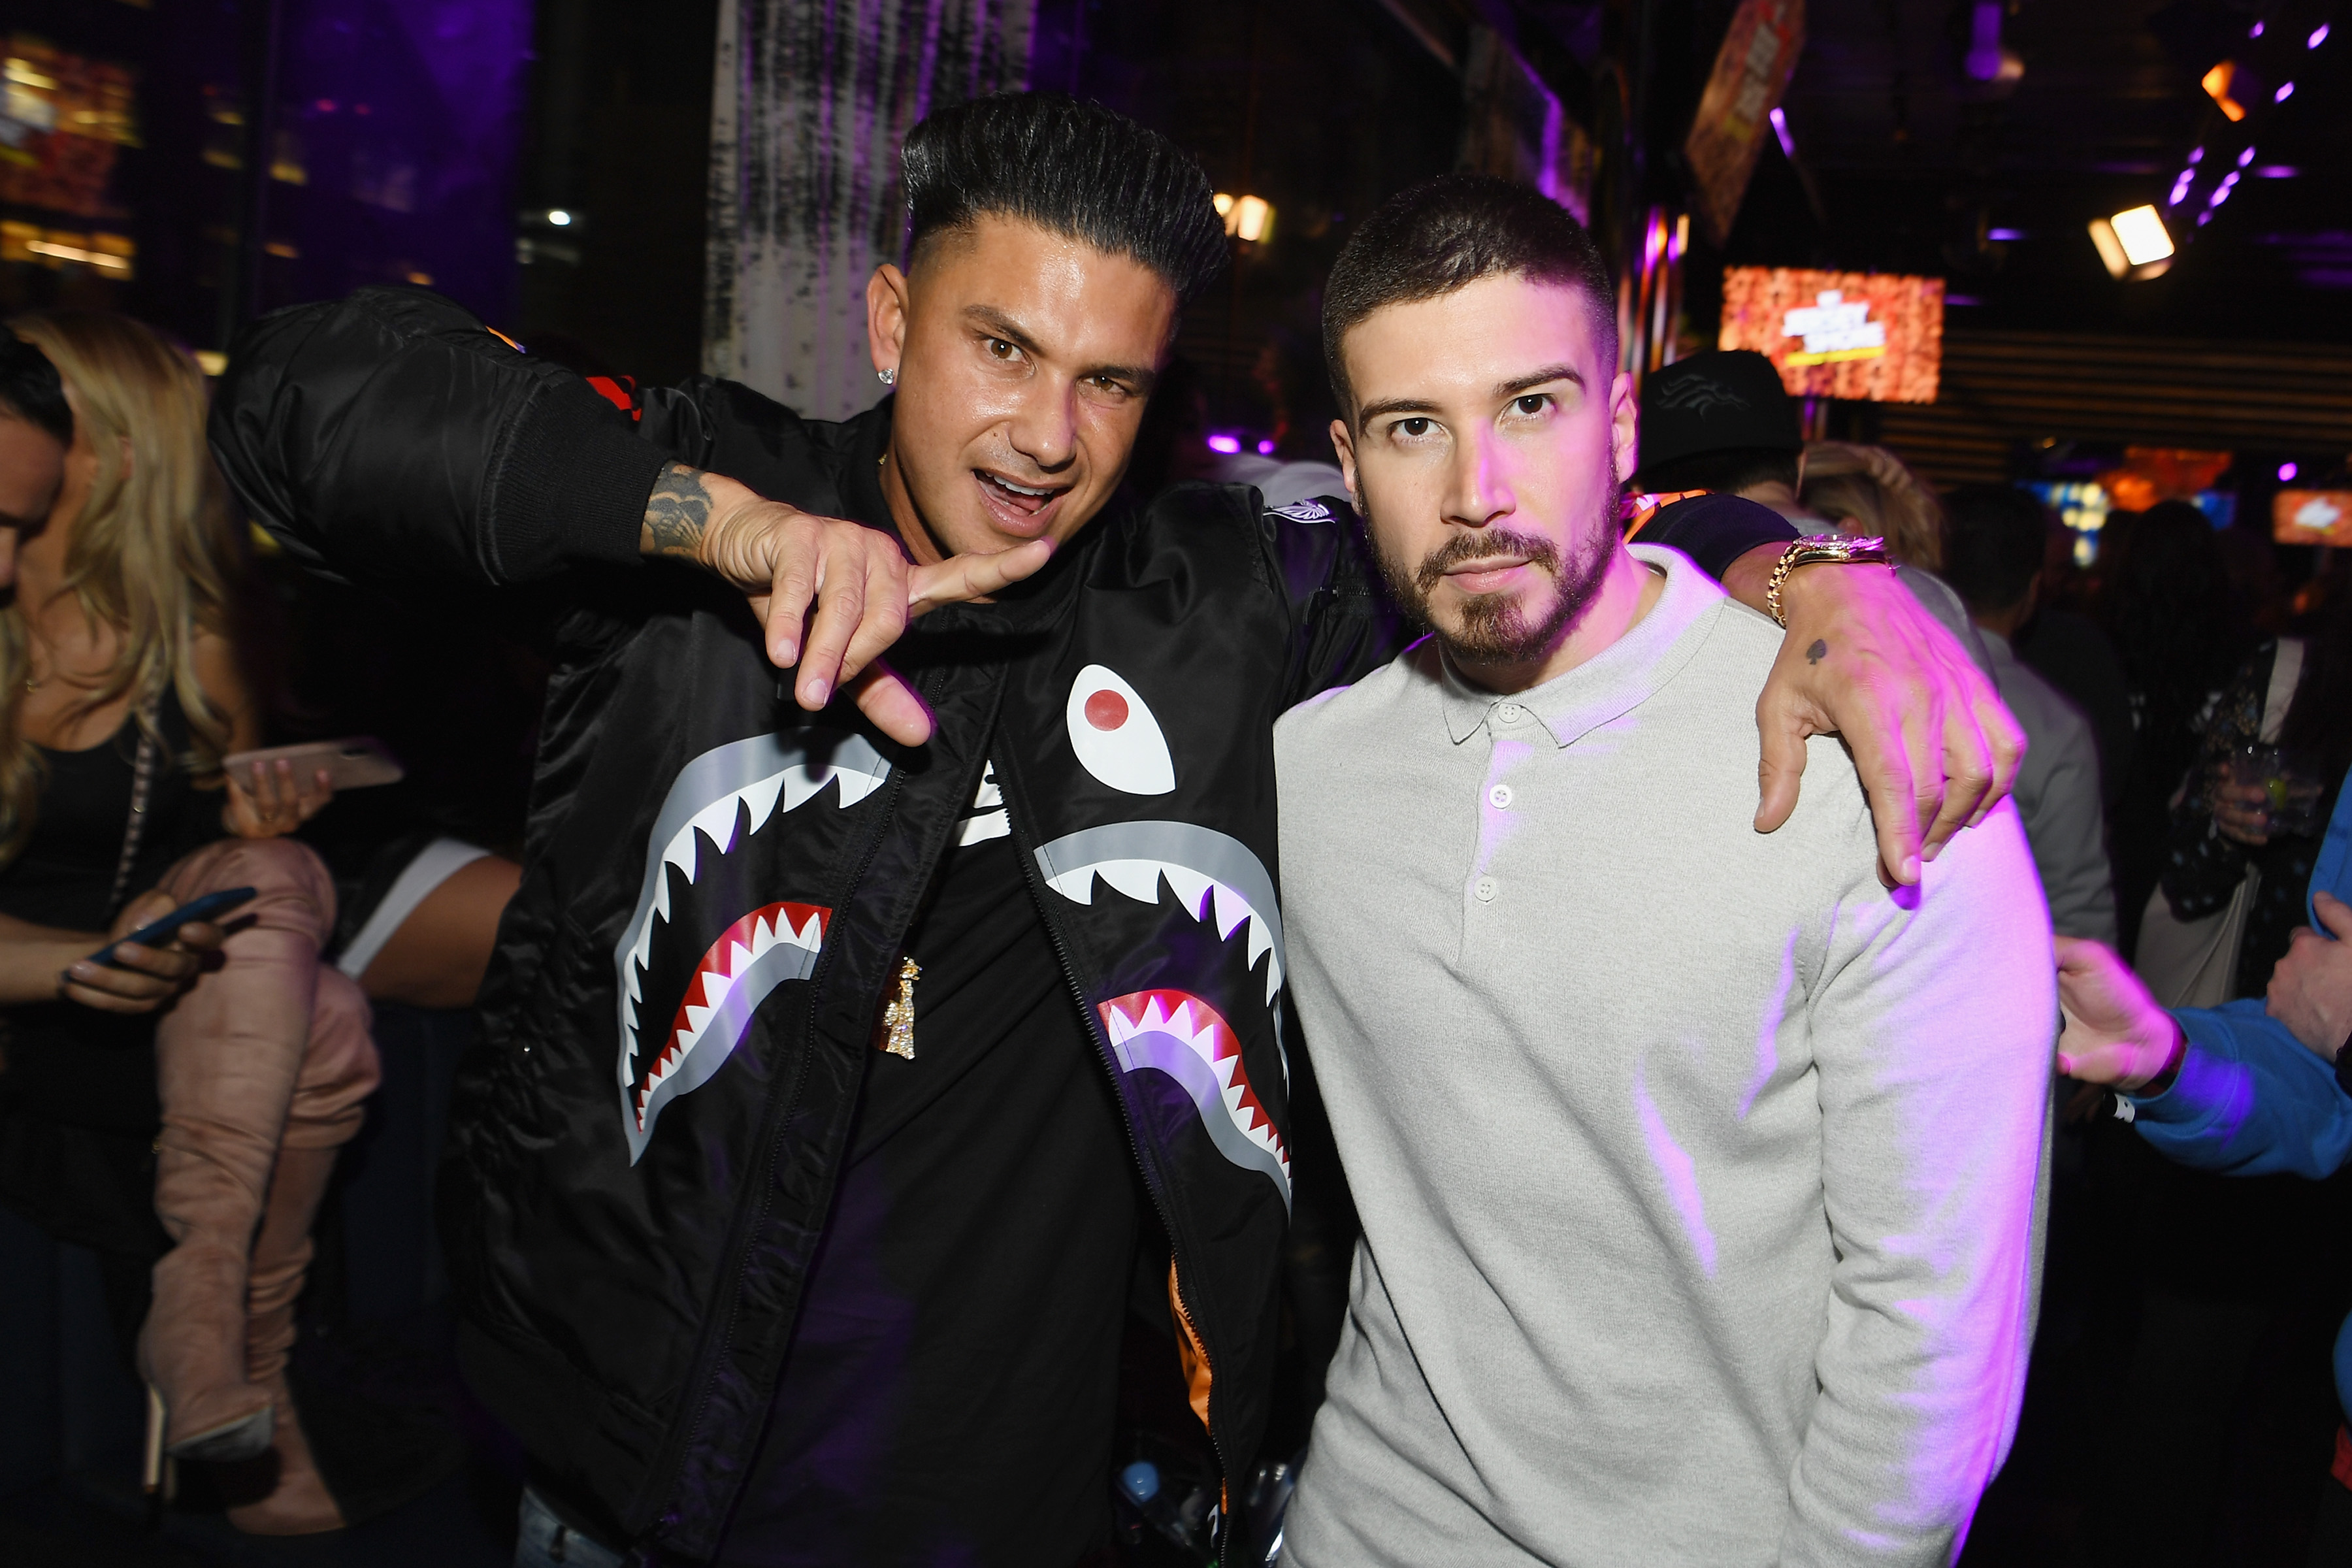 DJ Pauly D and Vinny Guadagnino attend MTV's 'Jersey Shore Family Vacation' New York premiere in 2018